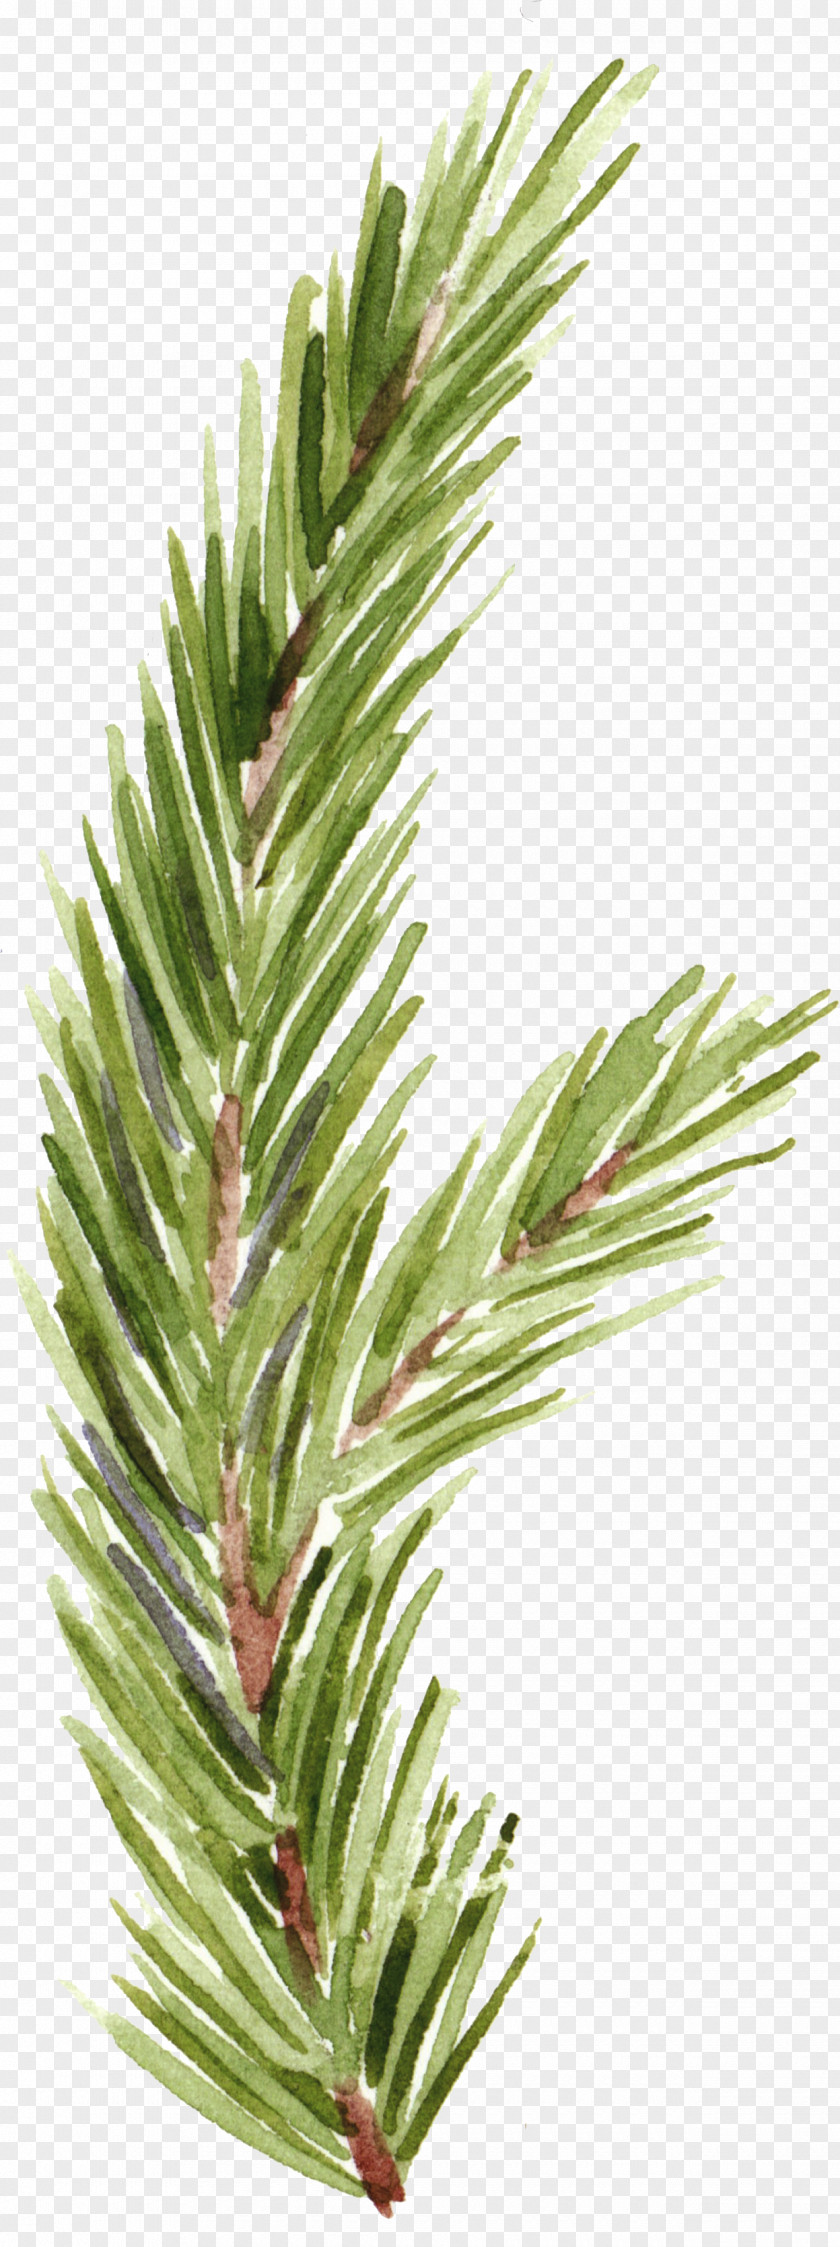 Pine Tree Hand-painted Cartoon Material Free To Pull PNG tree hand-painted cartoon material free to pull clipart PNG